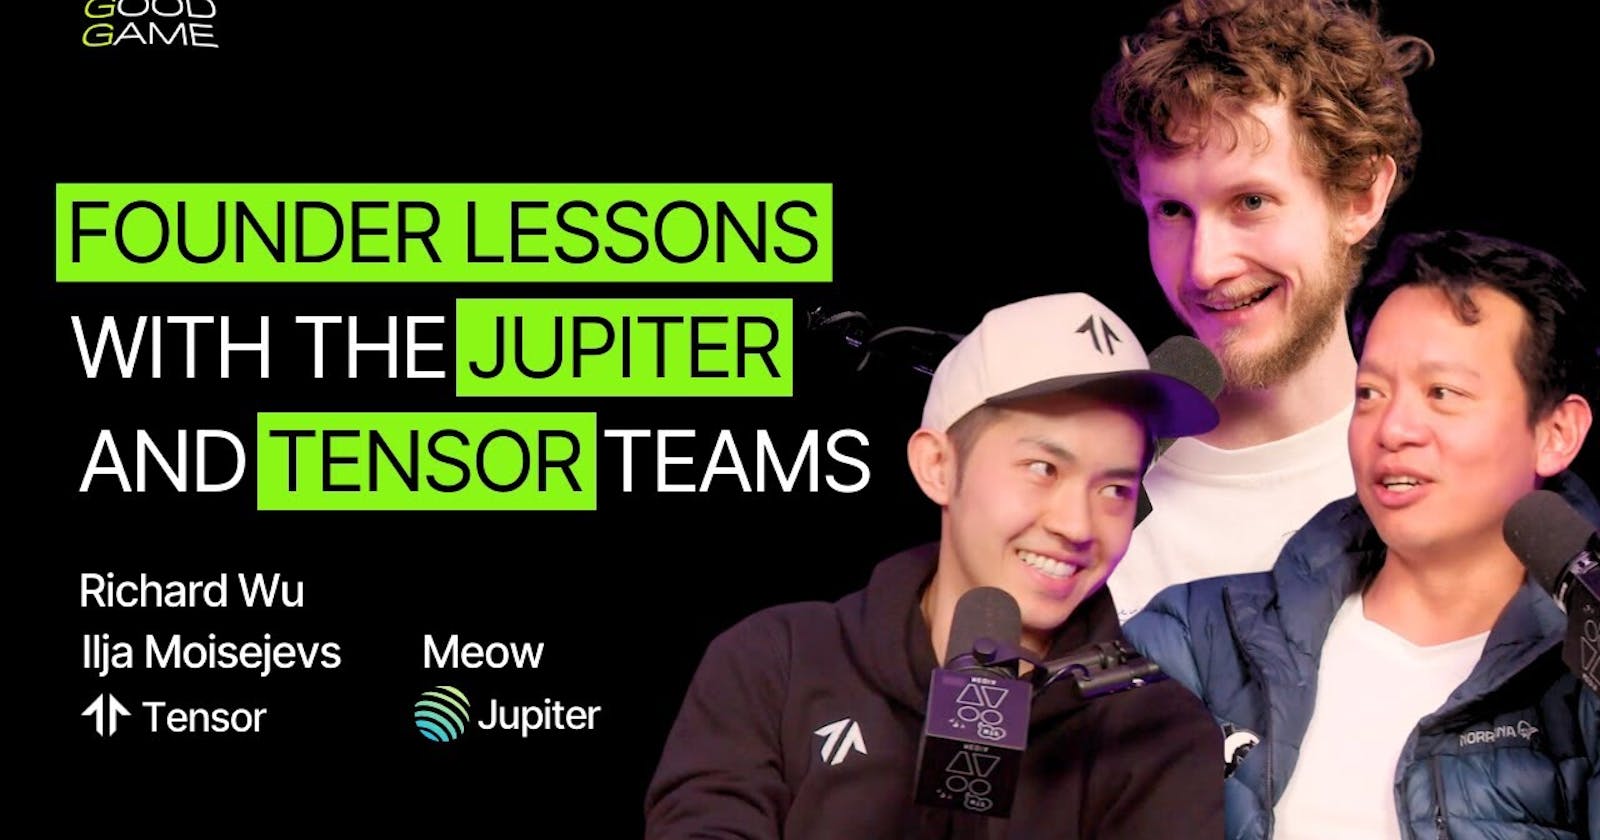 Notes from the Podcast “Founder Lessons with The Jupiter and Tensor Teams”